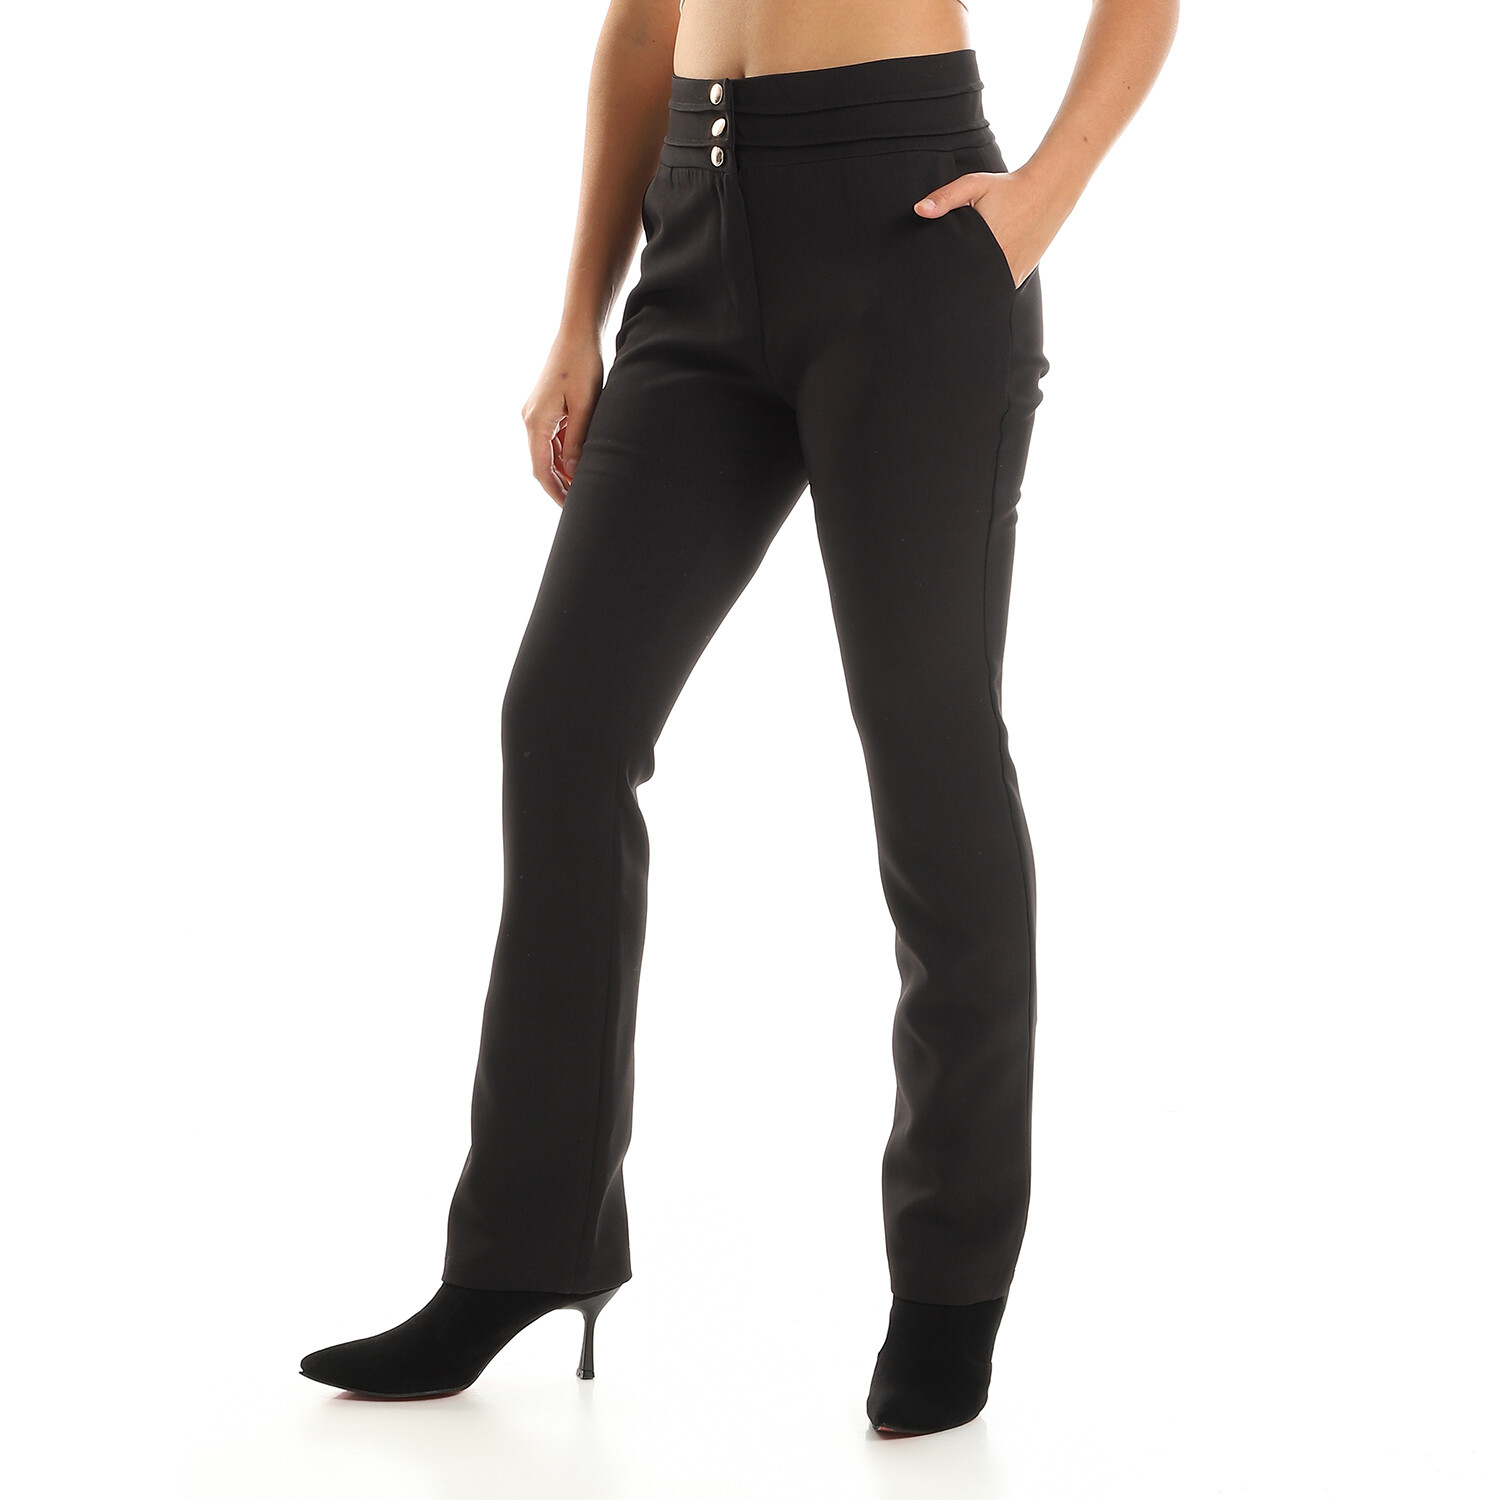 Straight Leg Smart Pants With Gold Buttons - Black-2918